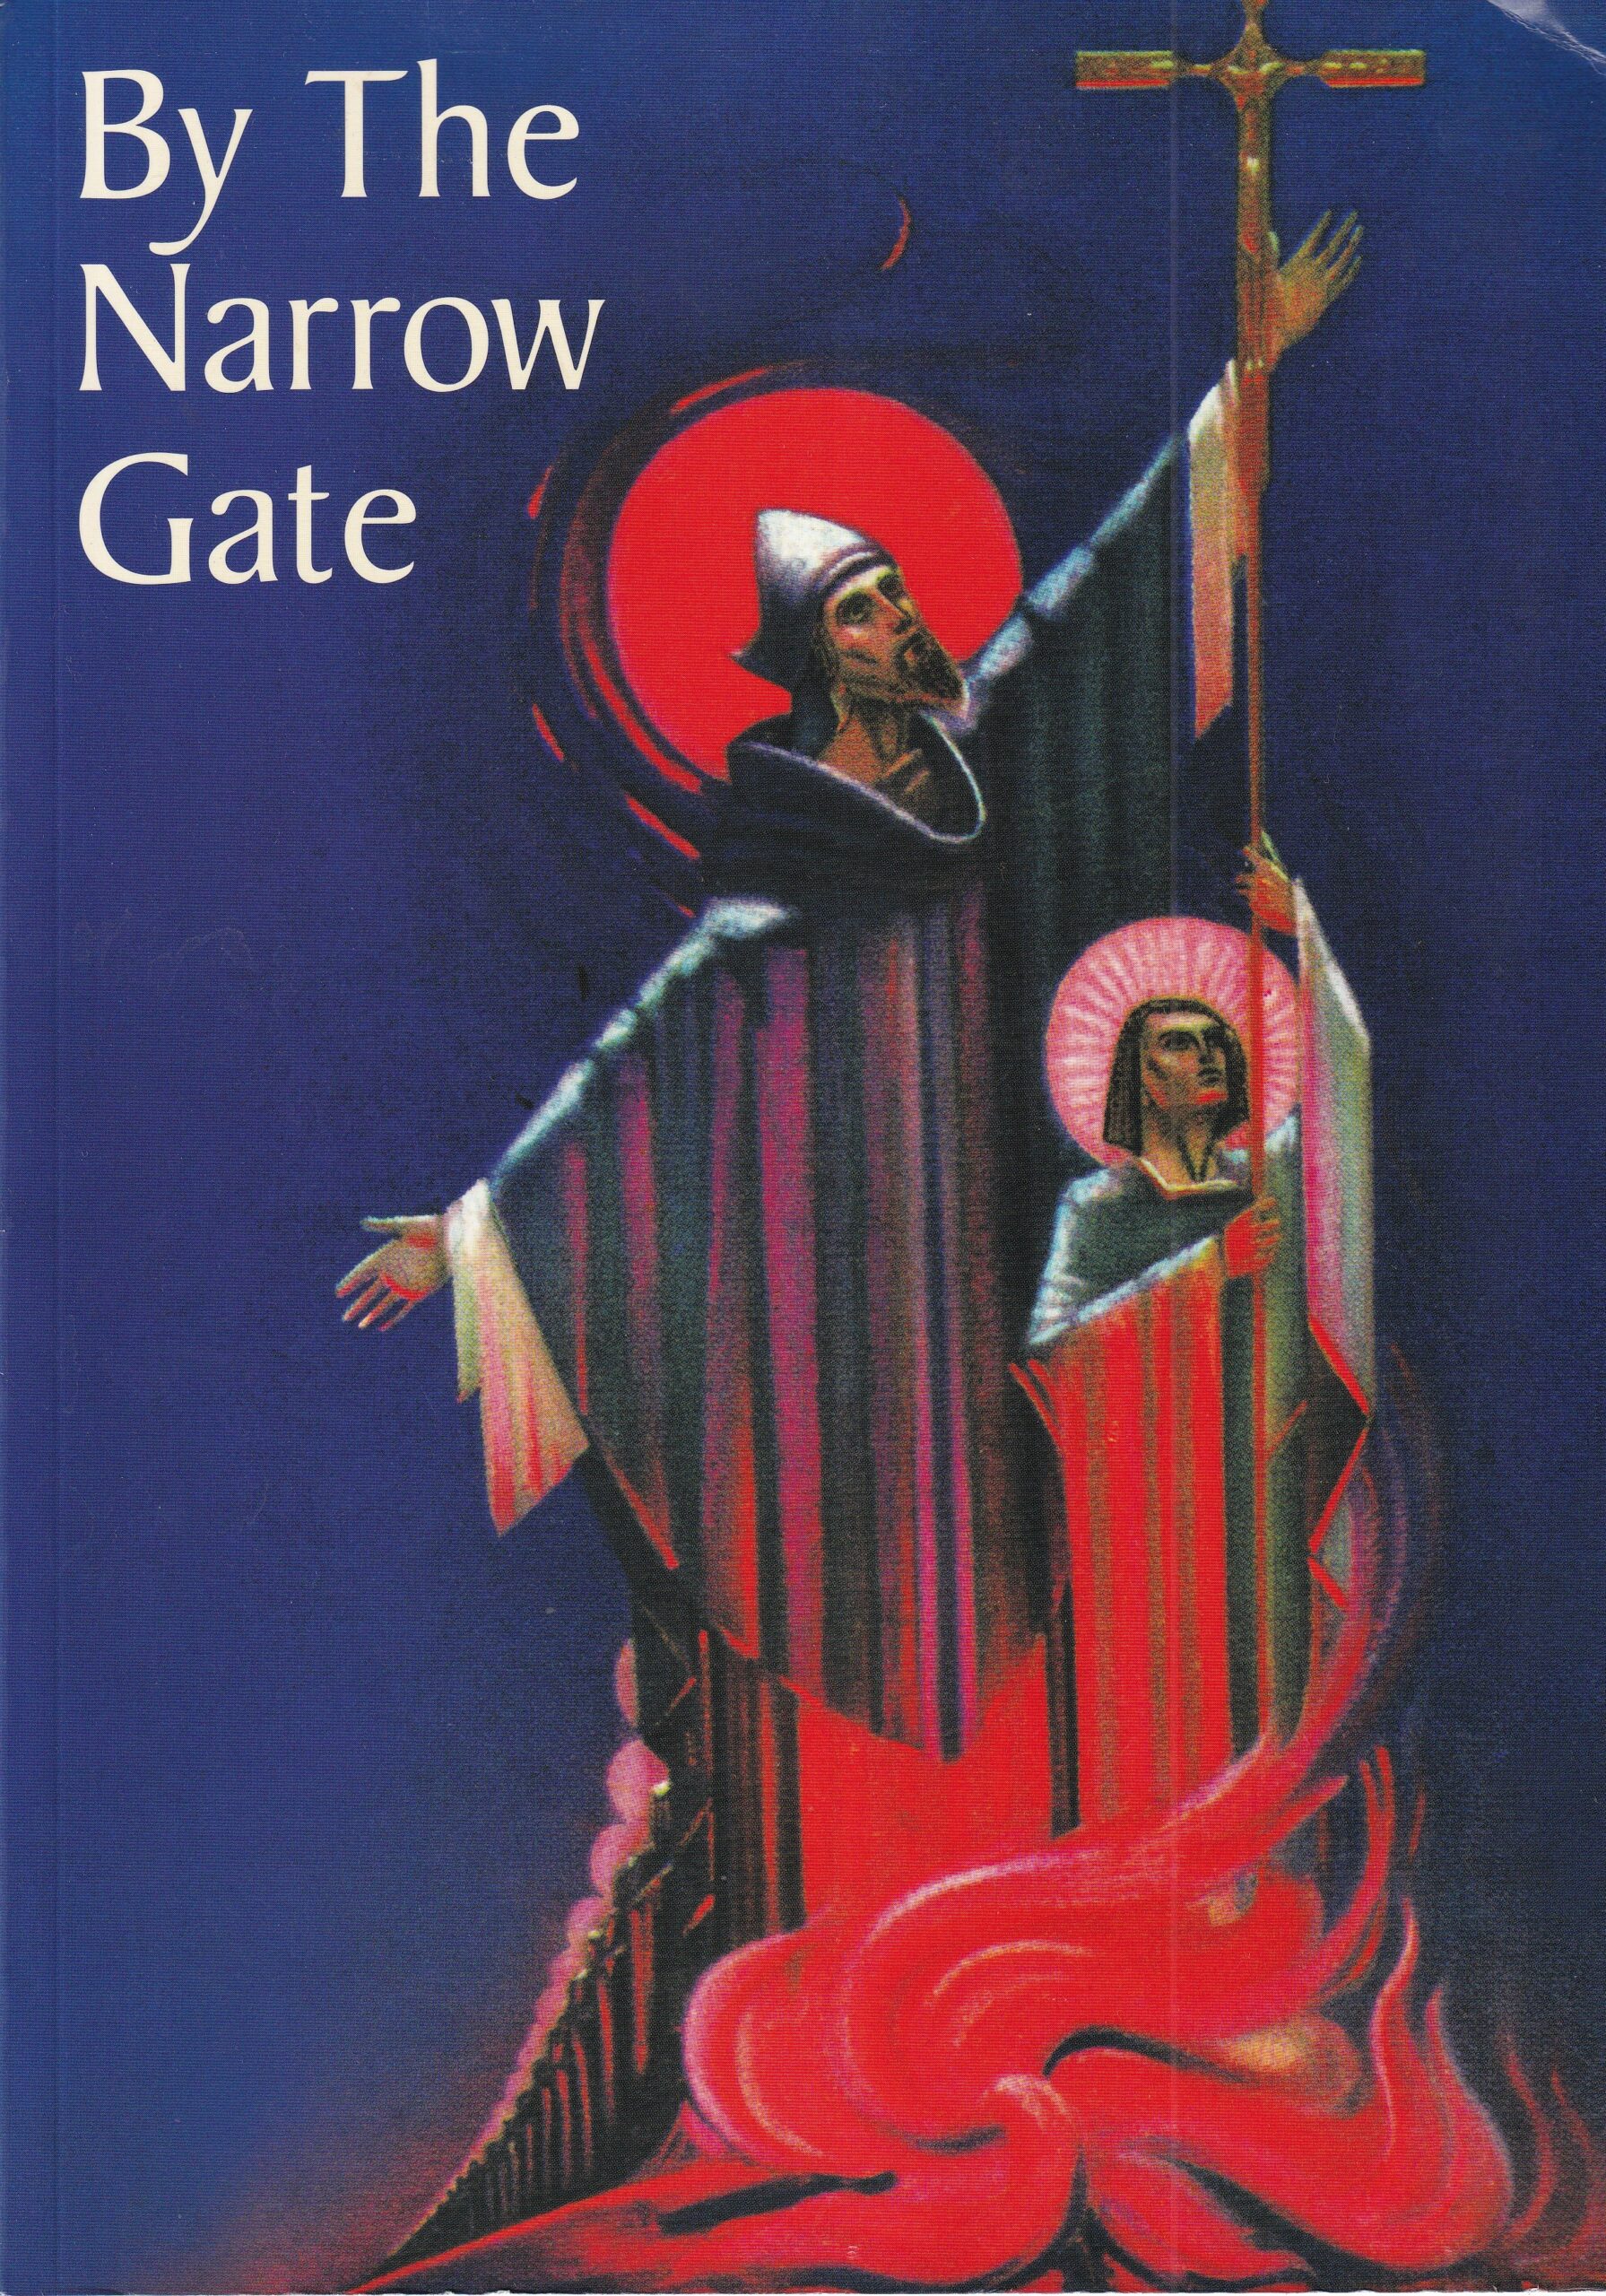 By The Narrow Gate by The Patrician Brothers